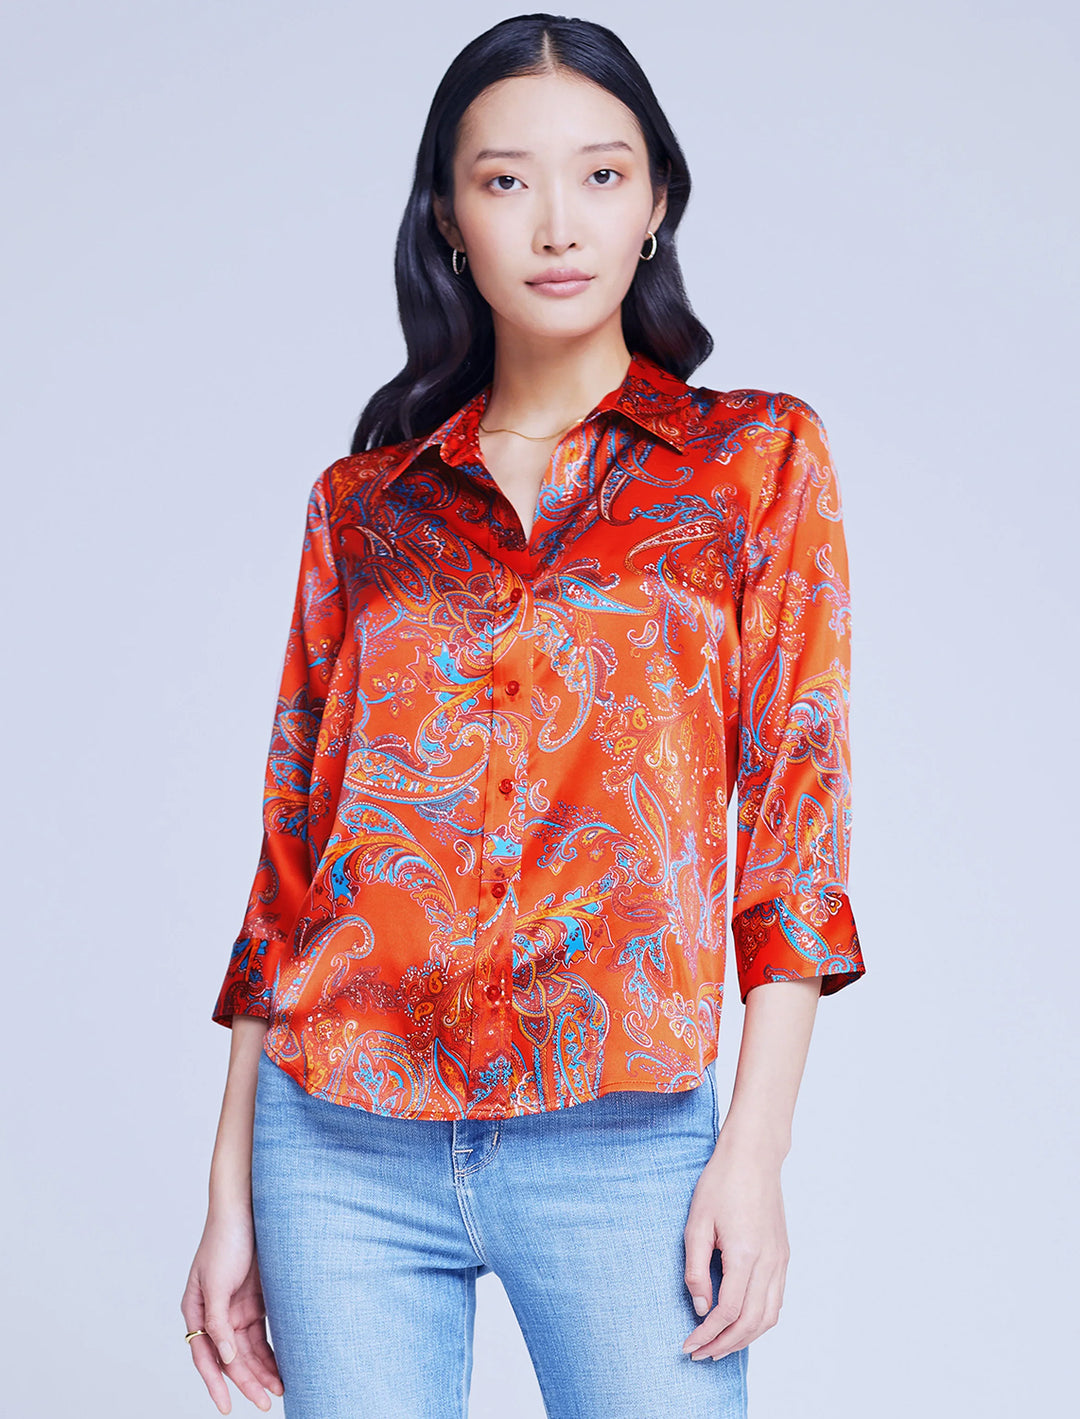 Model wearing L'agence's dani shirt in fire red paisley.